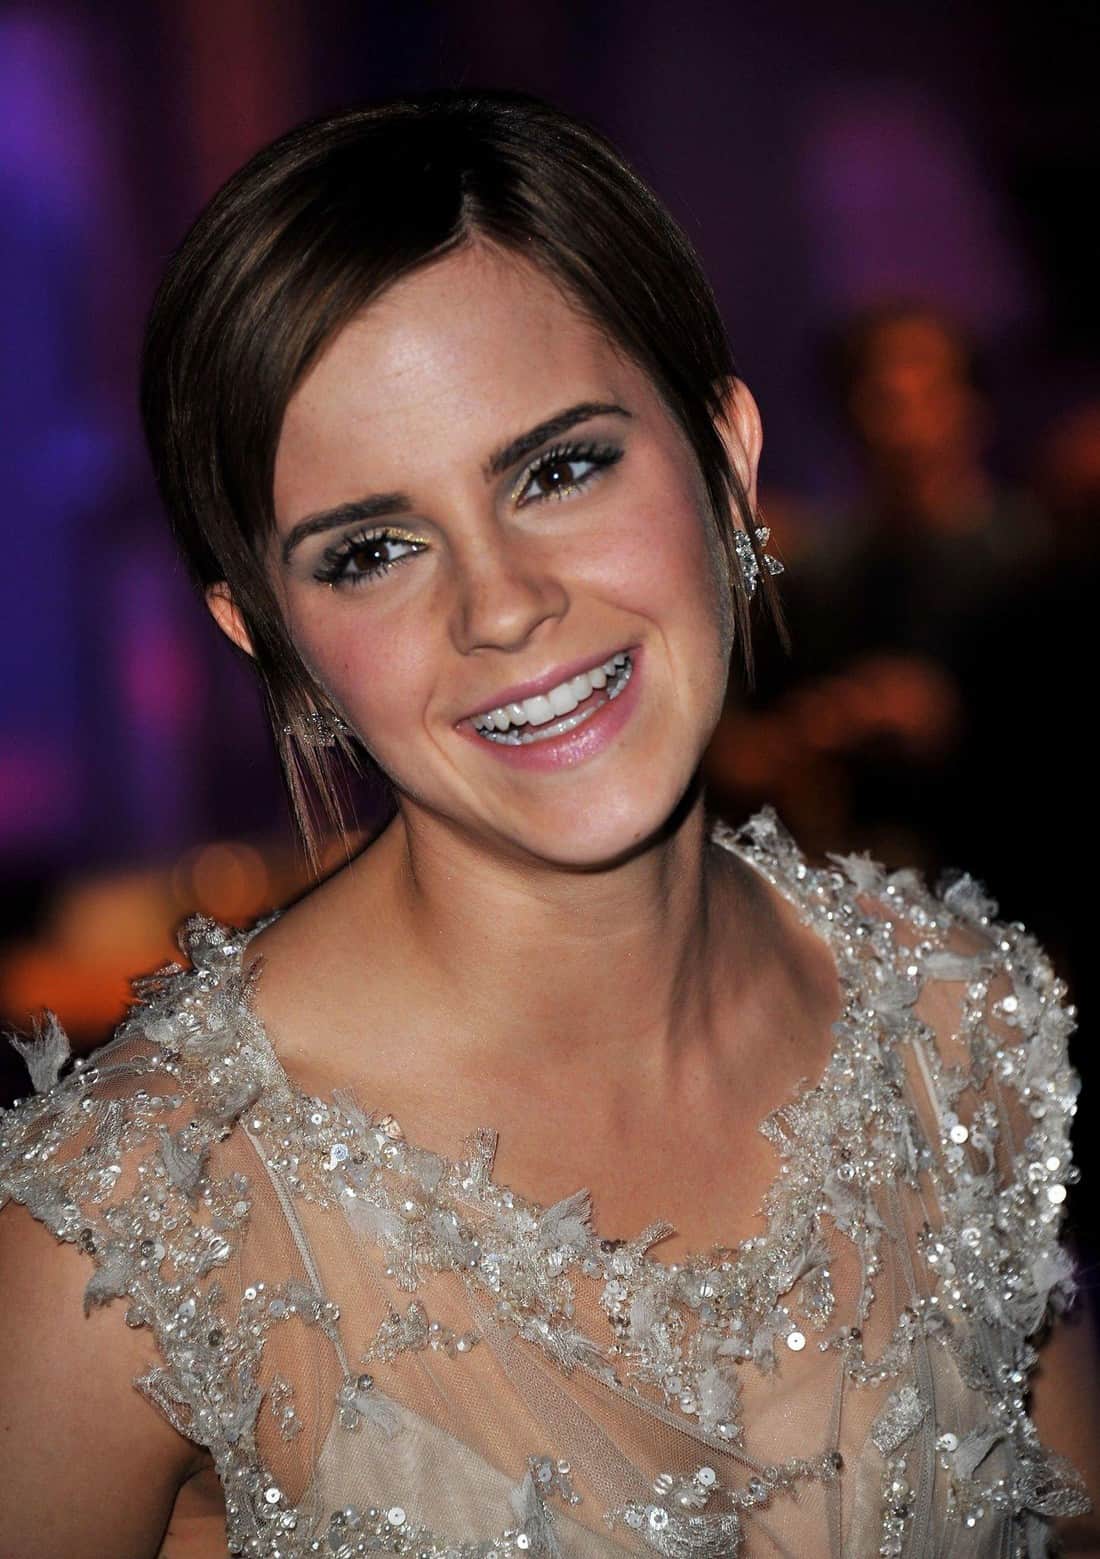 Emma Watson Shines in Elie Saab Dress at Harry Potter 7 Part 2 Afterparty